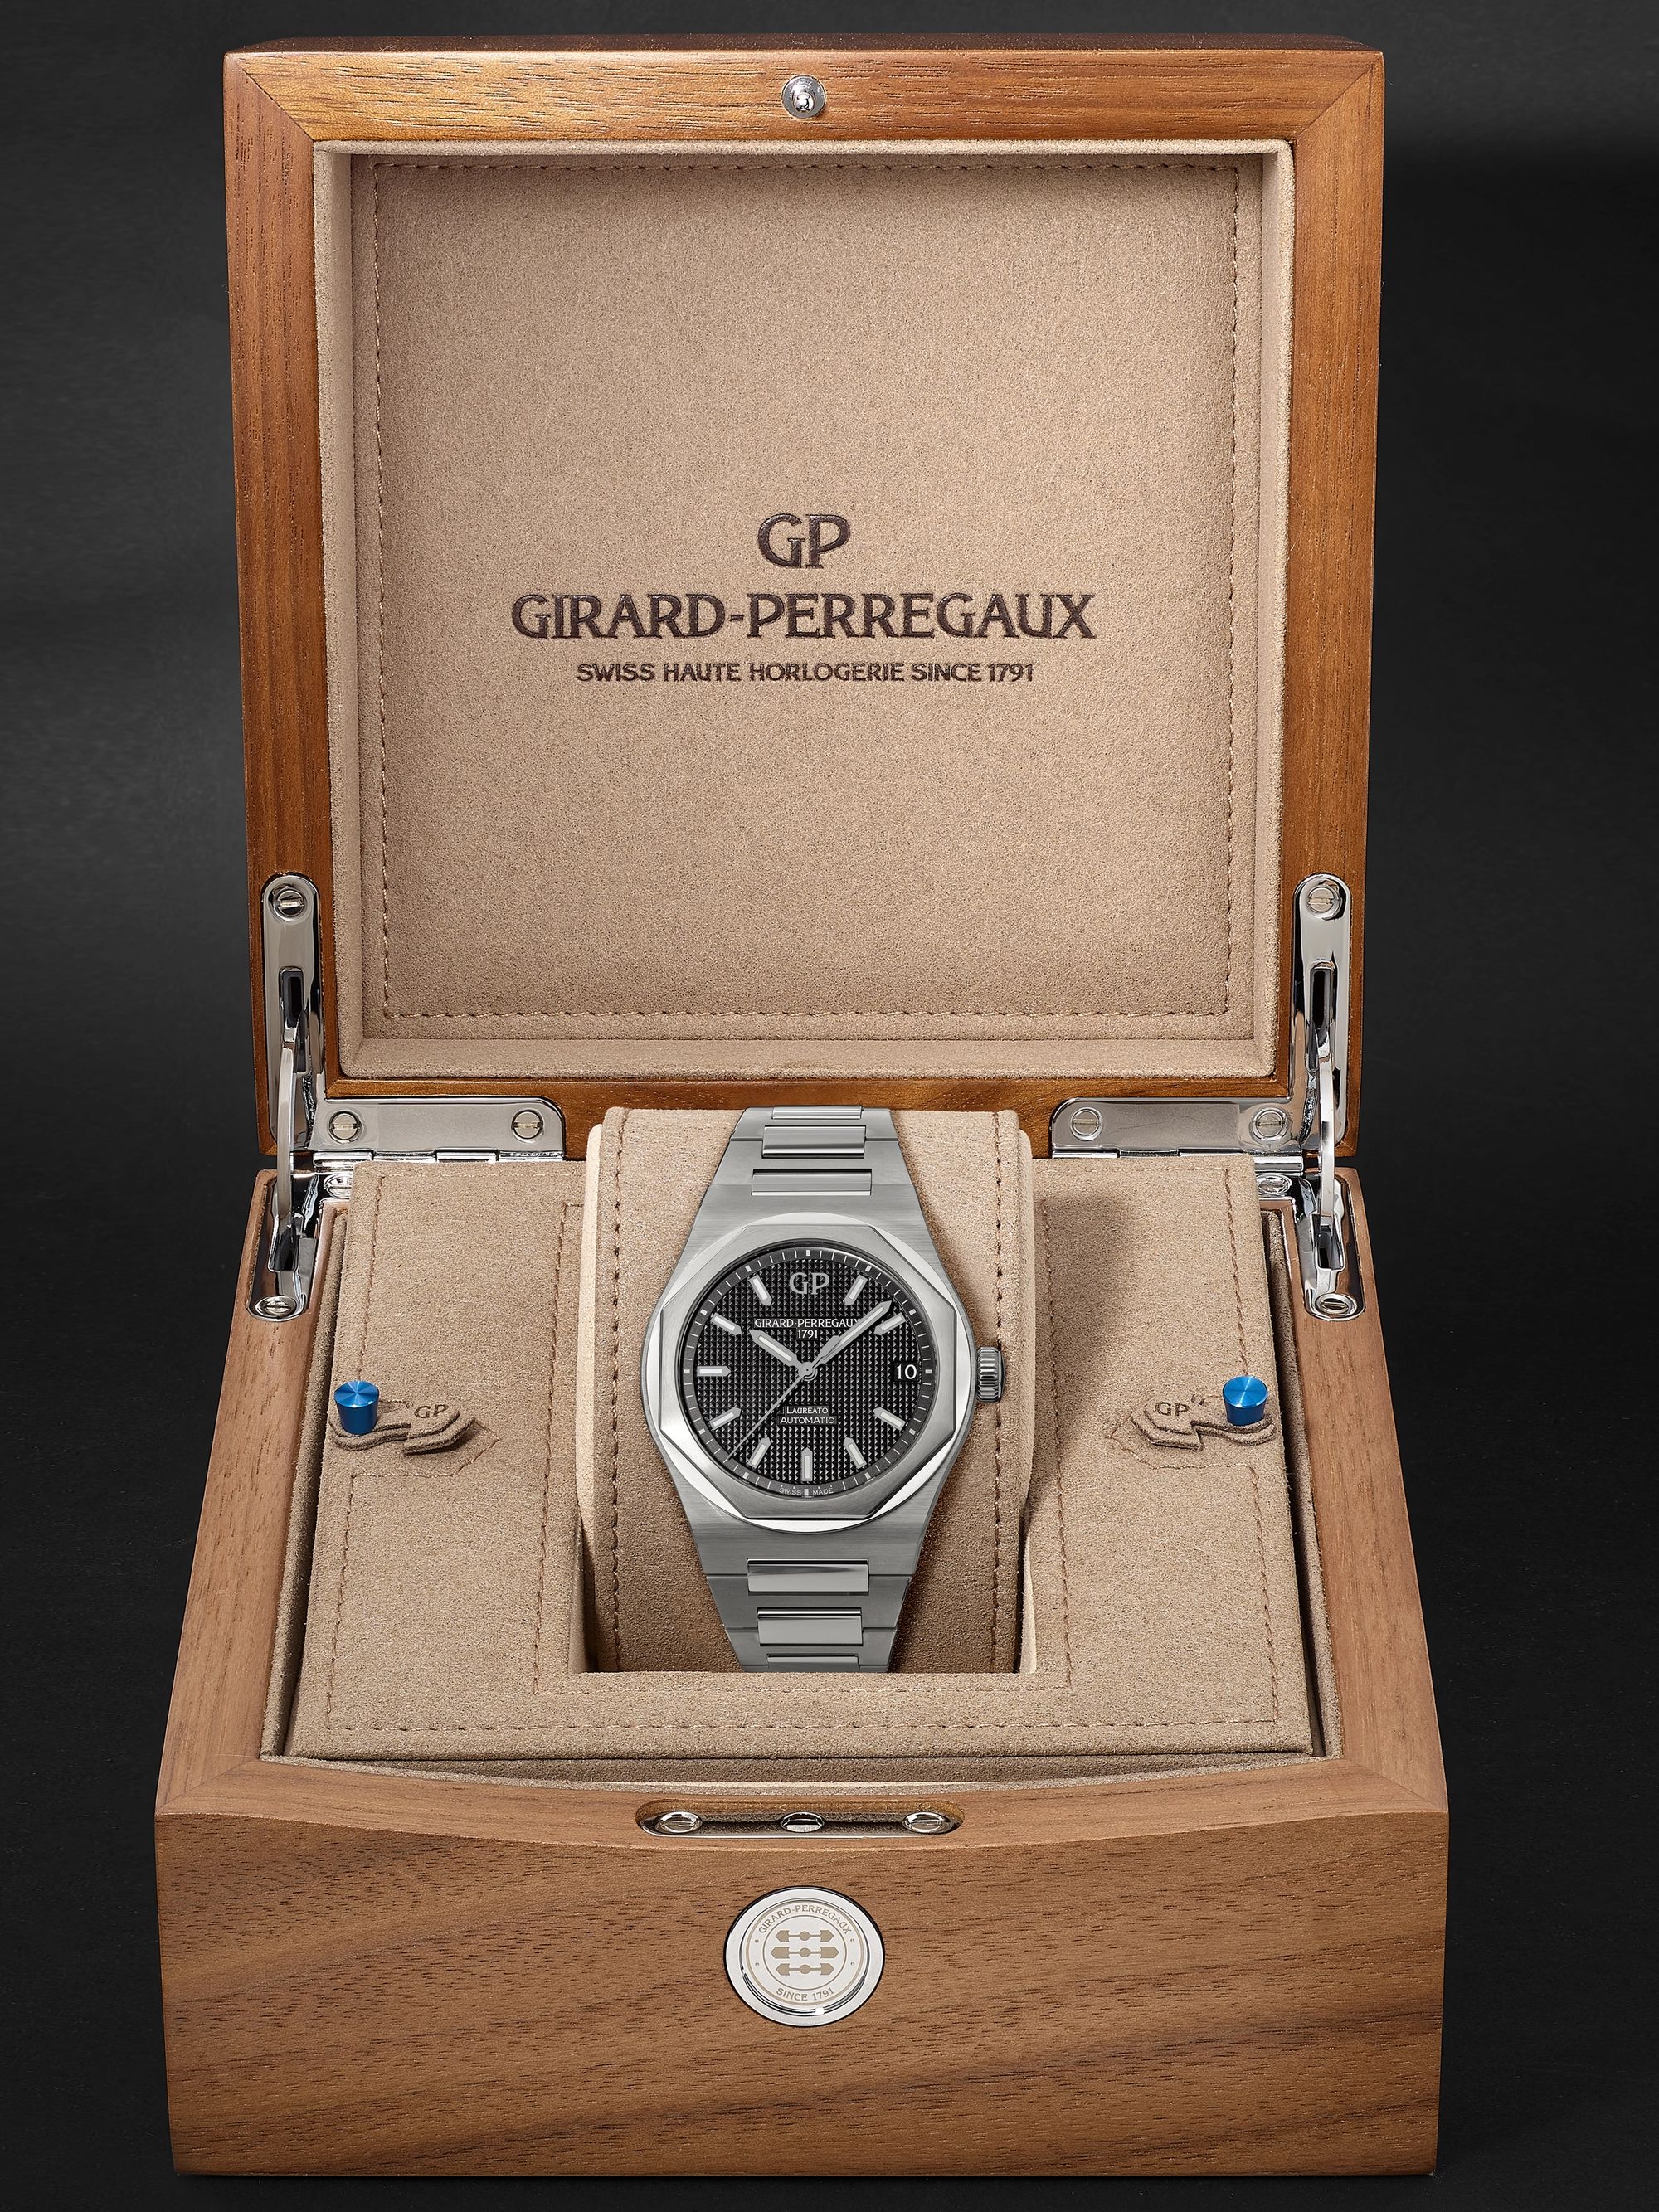 GIRARD-PERREGAUX Laureato Automatic 42mm Stainless Steel Watch, Ref. No. 81010-11-634-11A